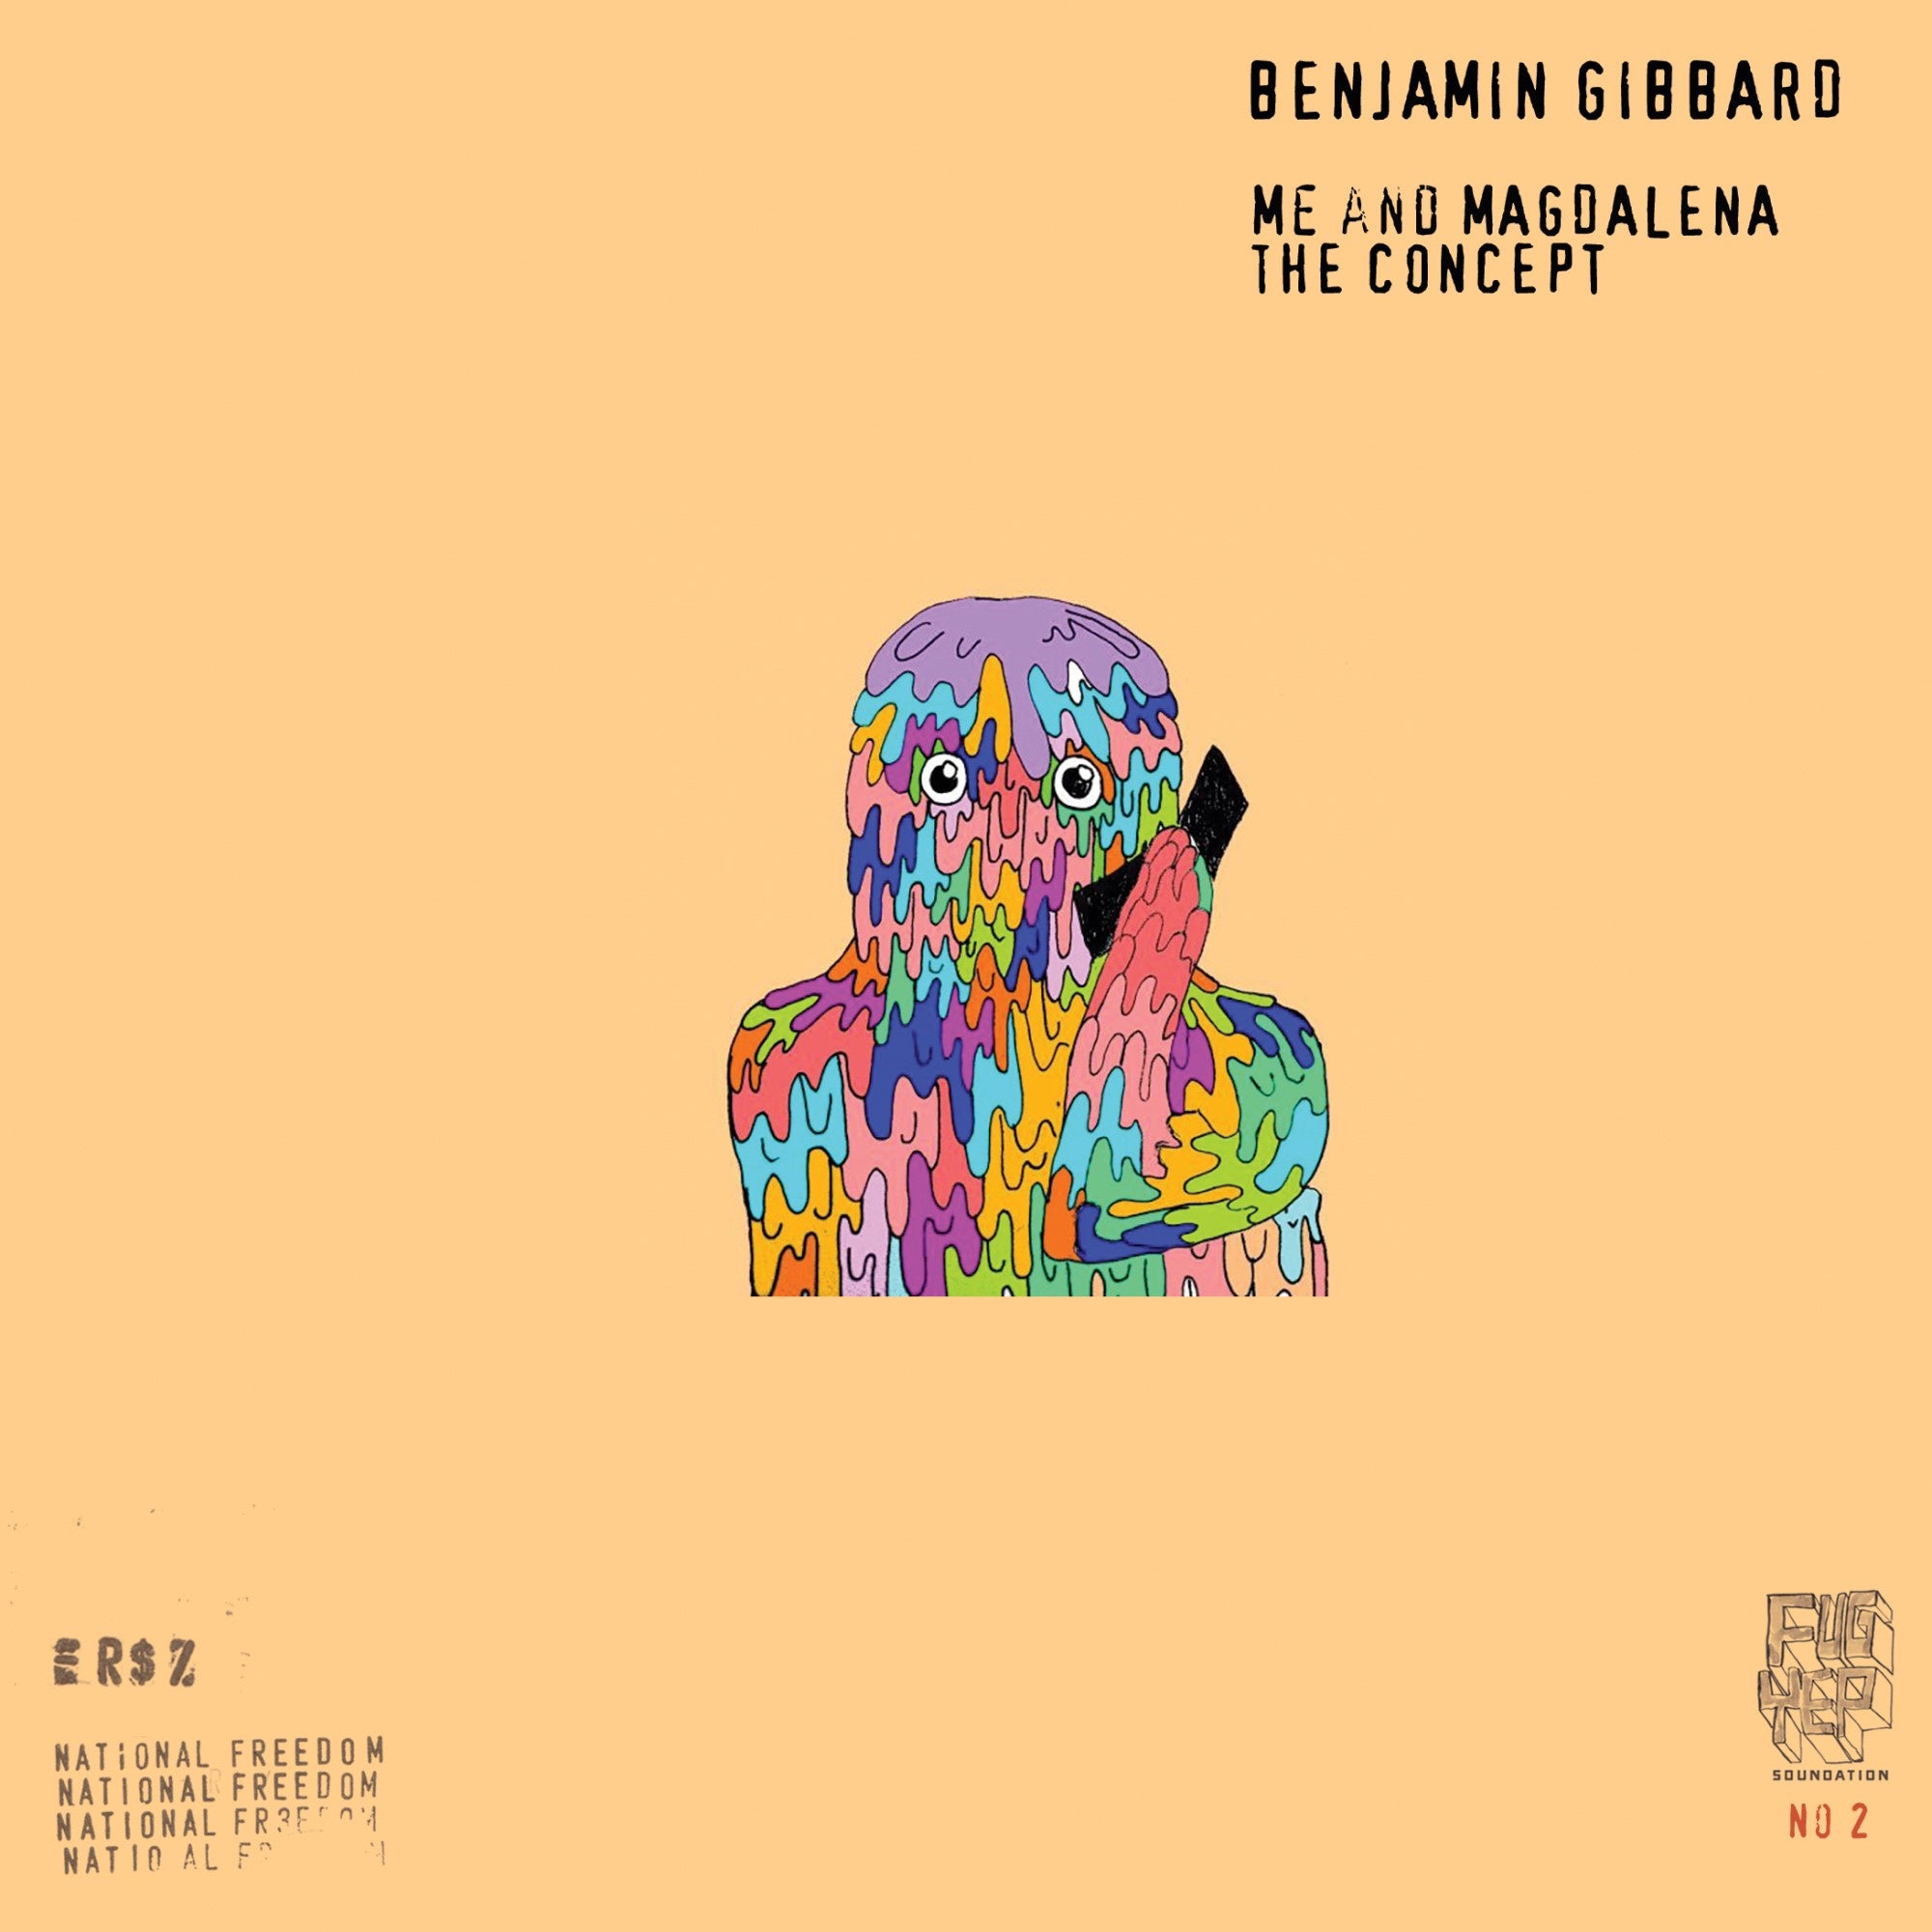 Benjamin Gibbard - Me And Magdalena / The Concept - New 7" 2019 Barsuk RSD Limited Release - Indie Rock